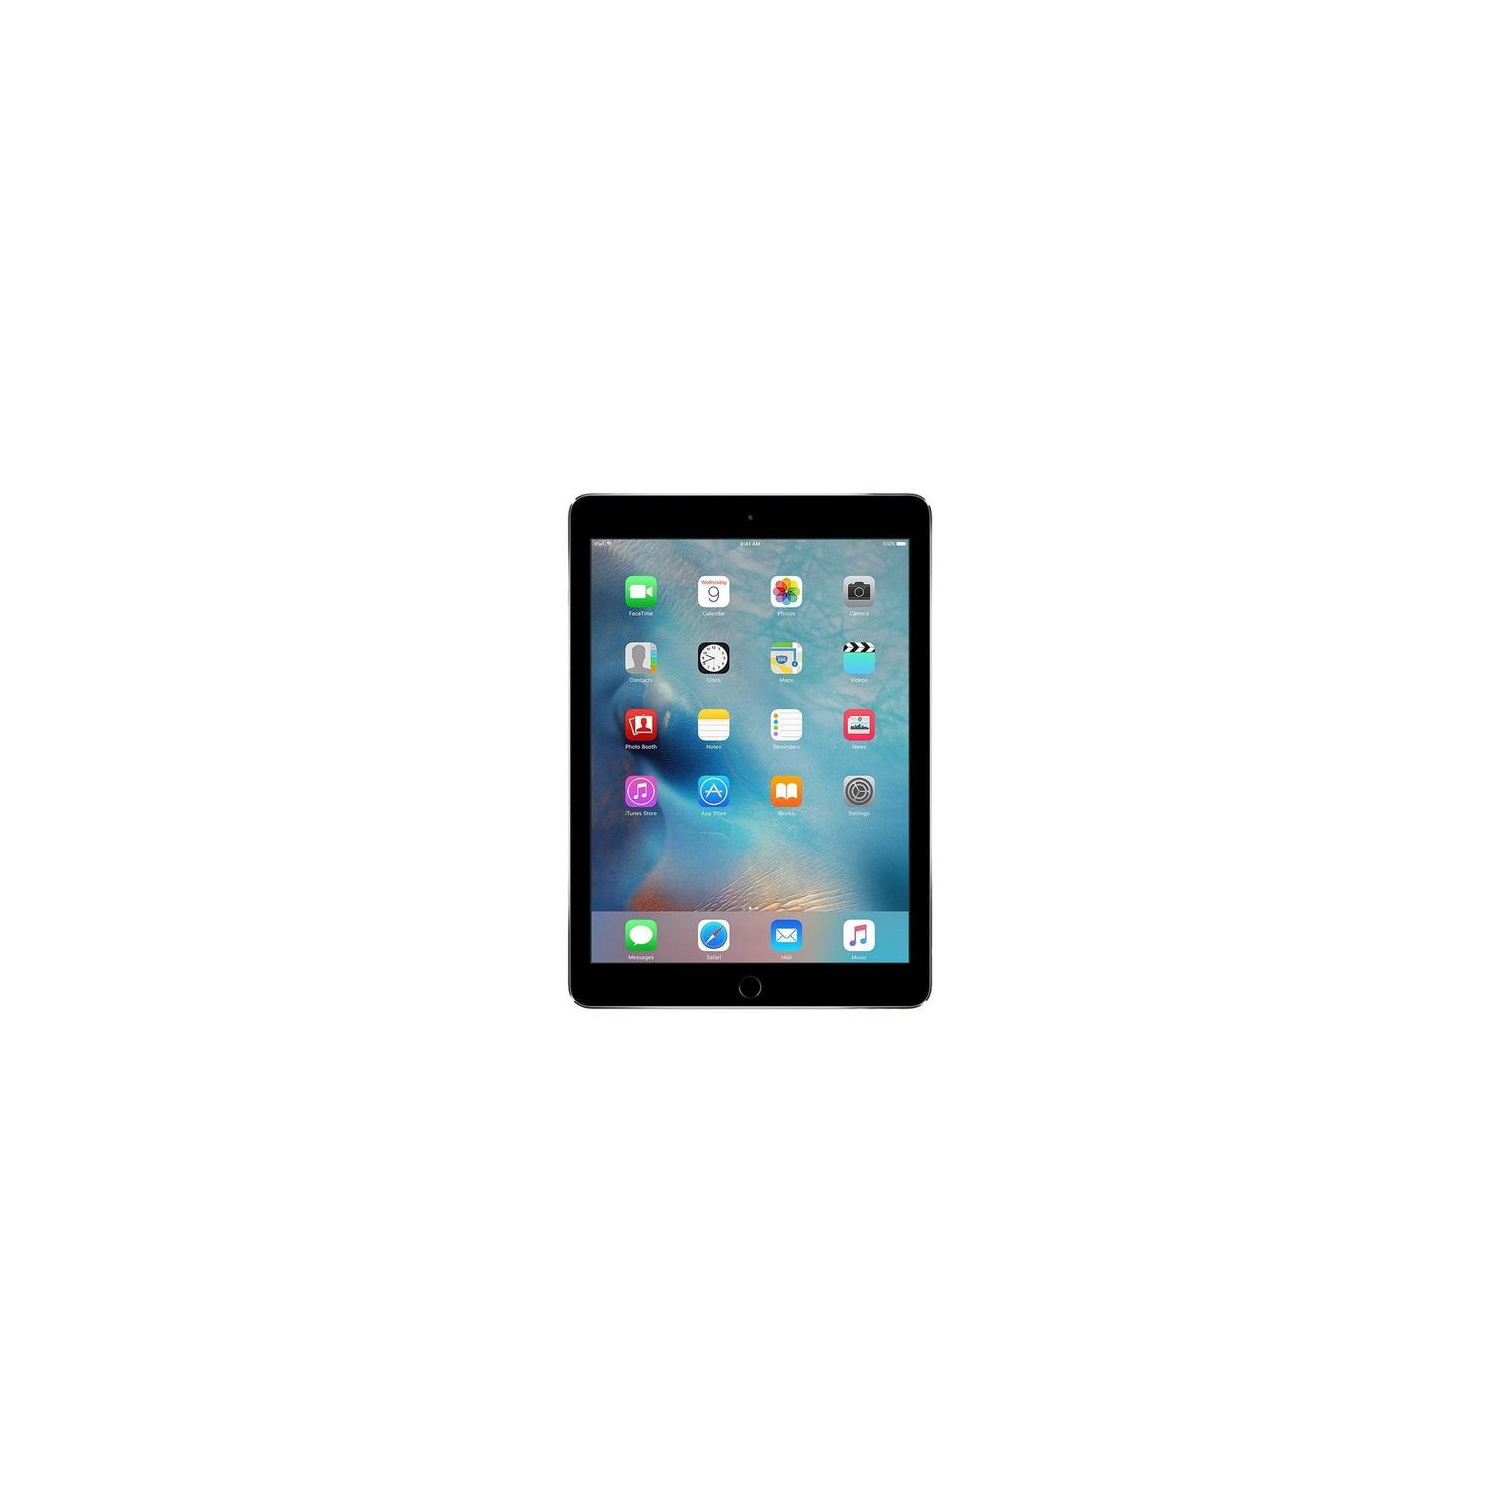 Refurbished (Excellent) Apple iPad Air 2 A1566 (WiFi) 16GB Space 